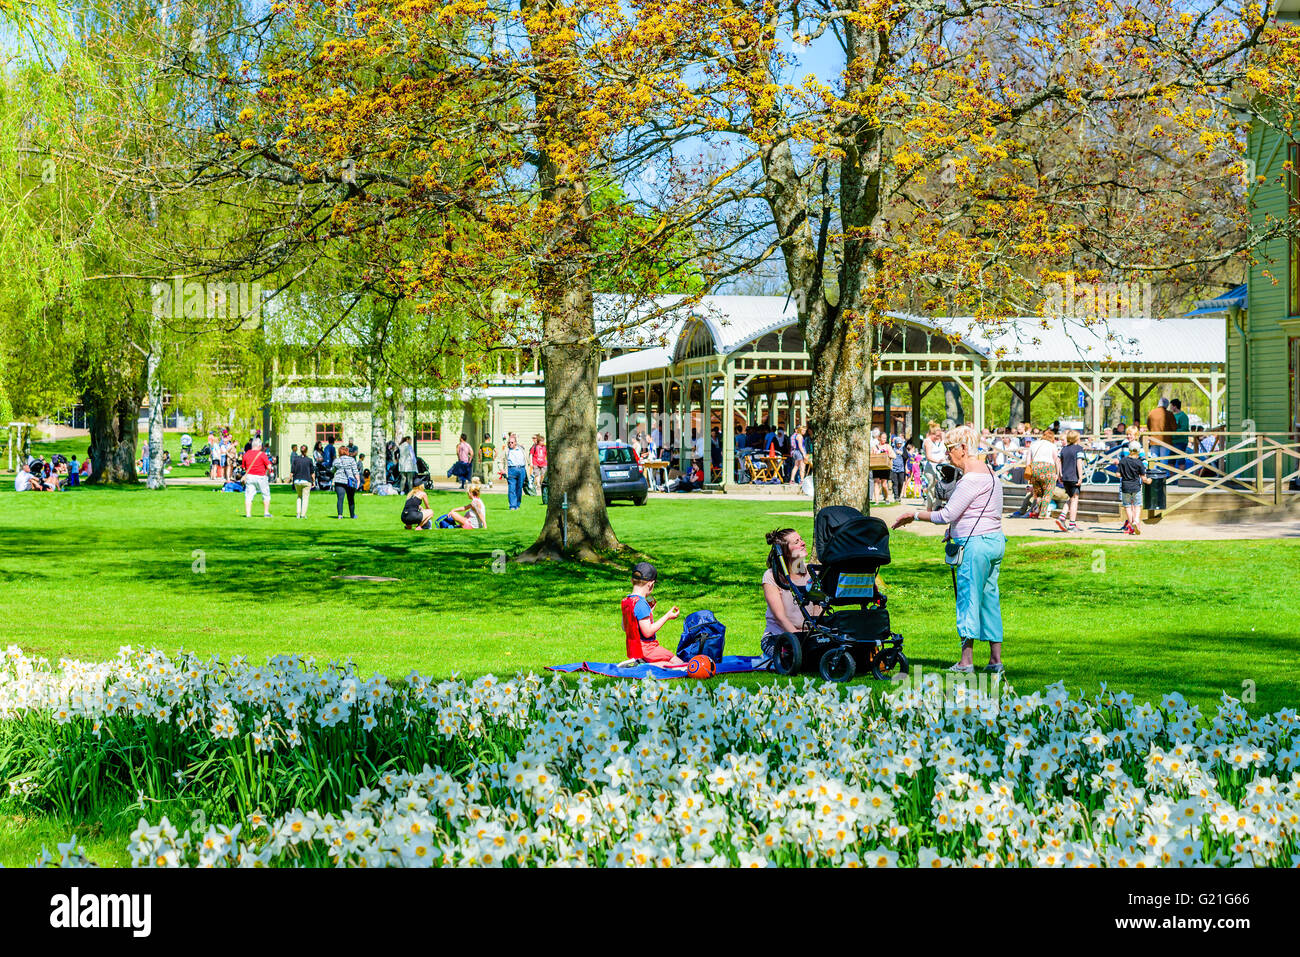 Ronneby, Sweden - May 8, 2016: People enjoying the fine weather while relaxing in the park. Ongoing flea market in the open buil Stock Photo